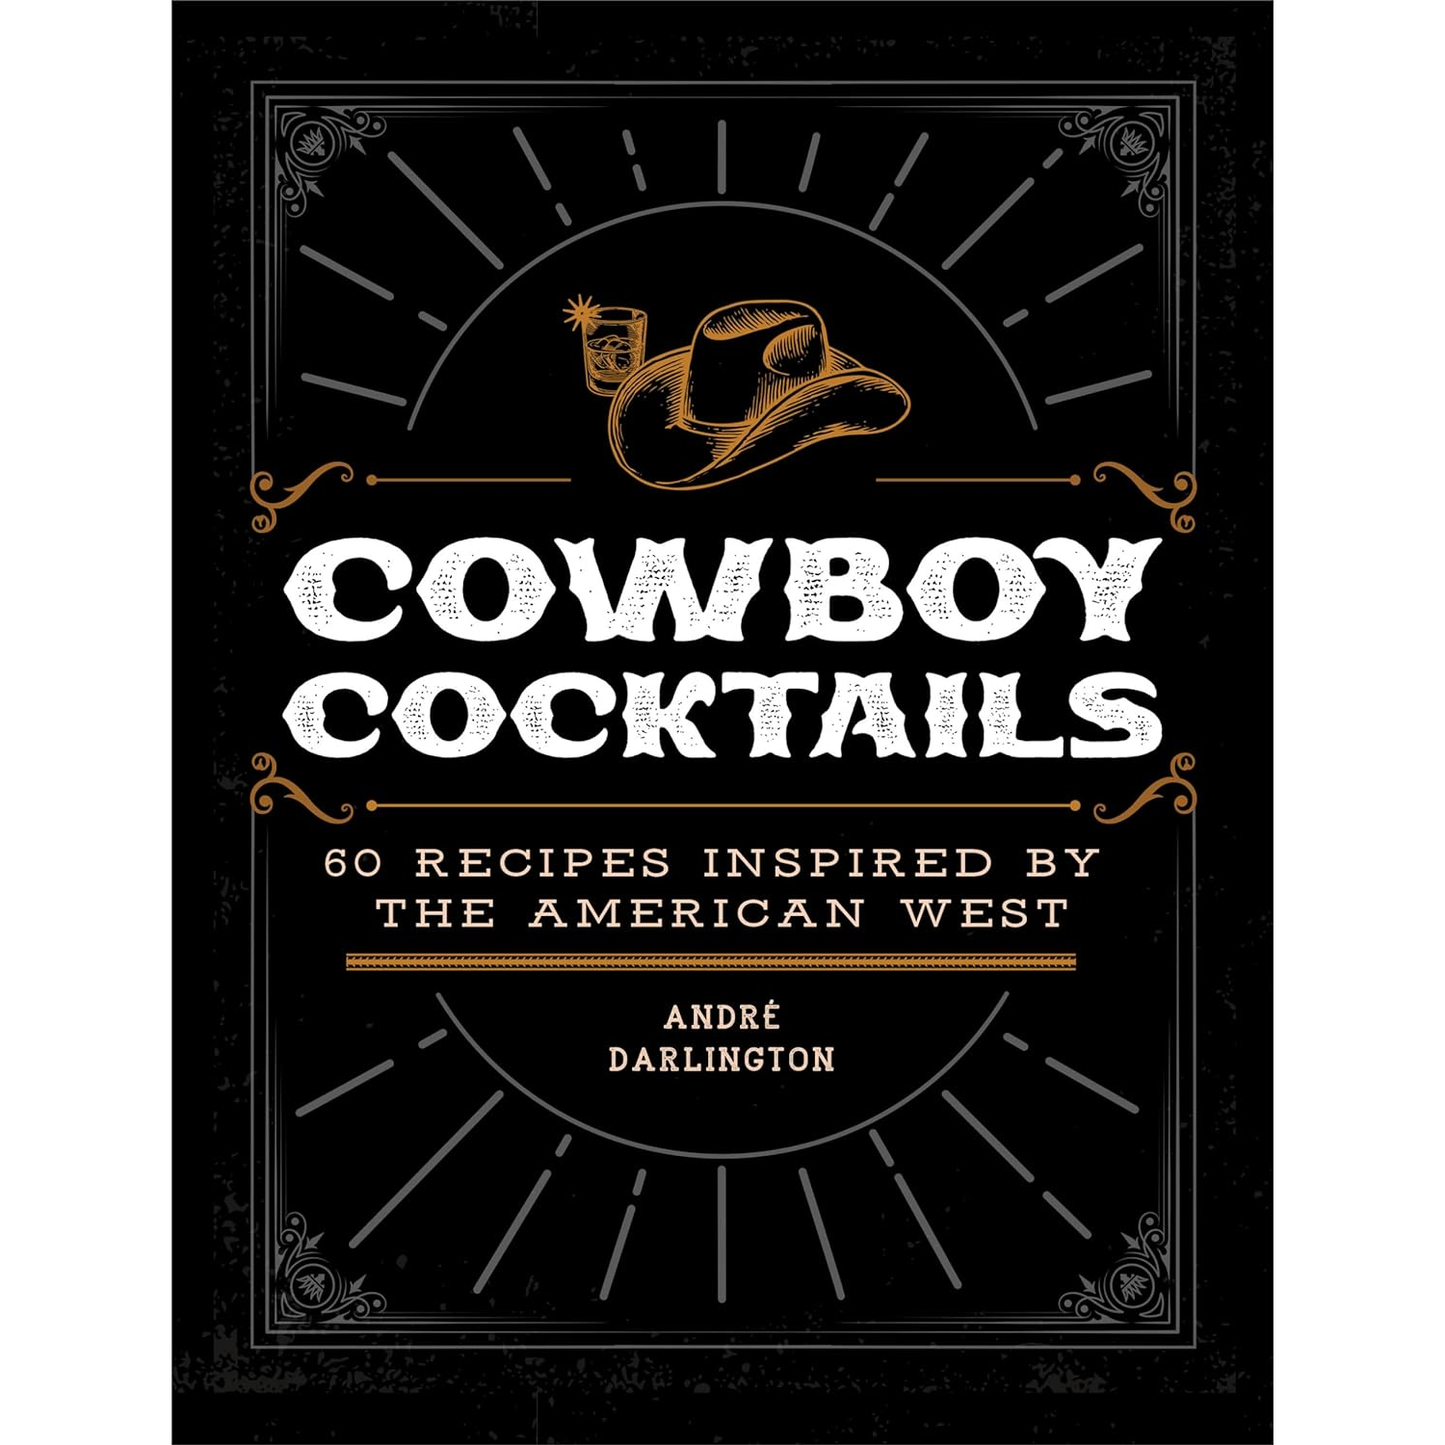 Cowboy Cocktails: 60 Recipes Inspired by the American West by André Darlington